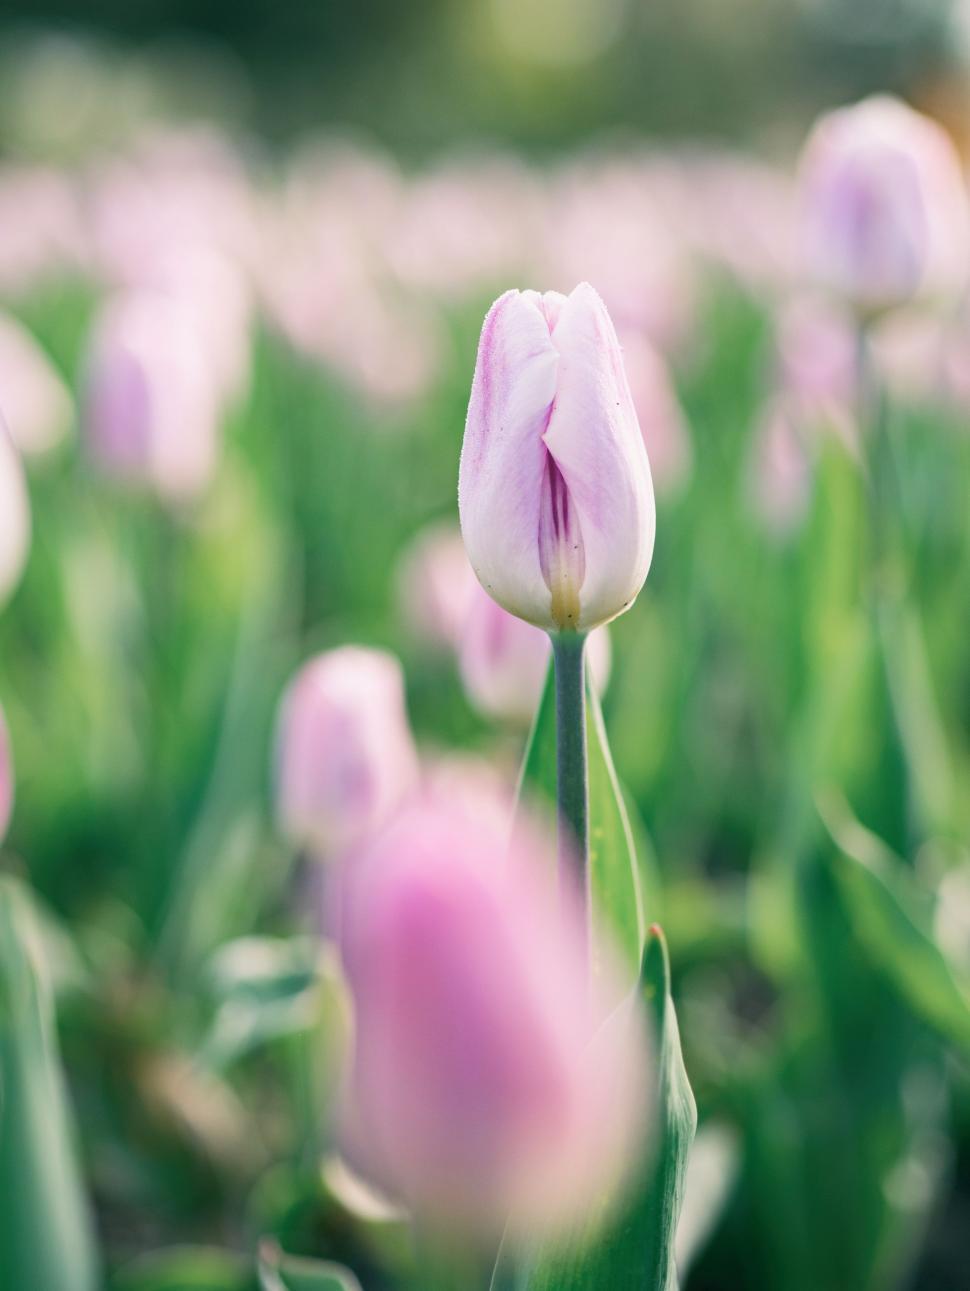 Free Image of Field of Pink Tulips With Green Leaves 